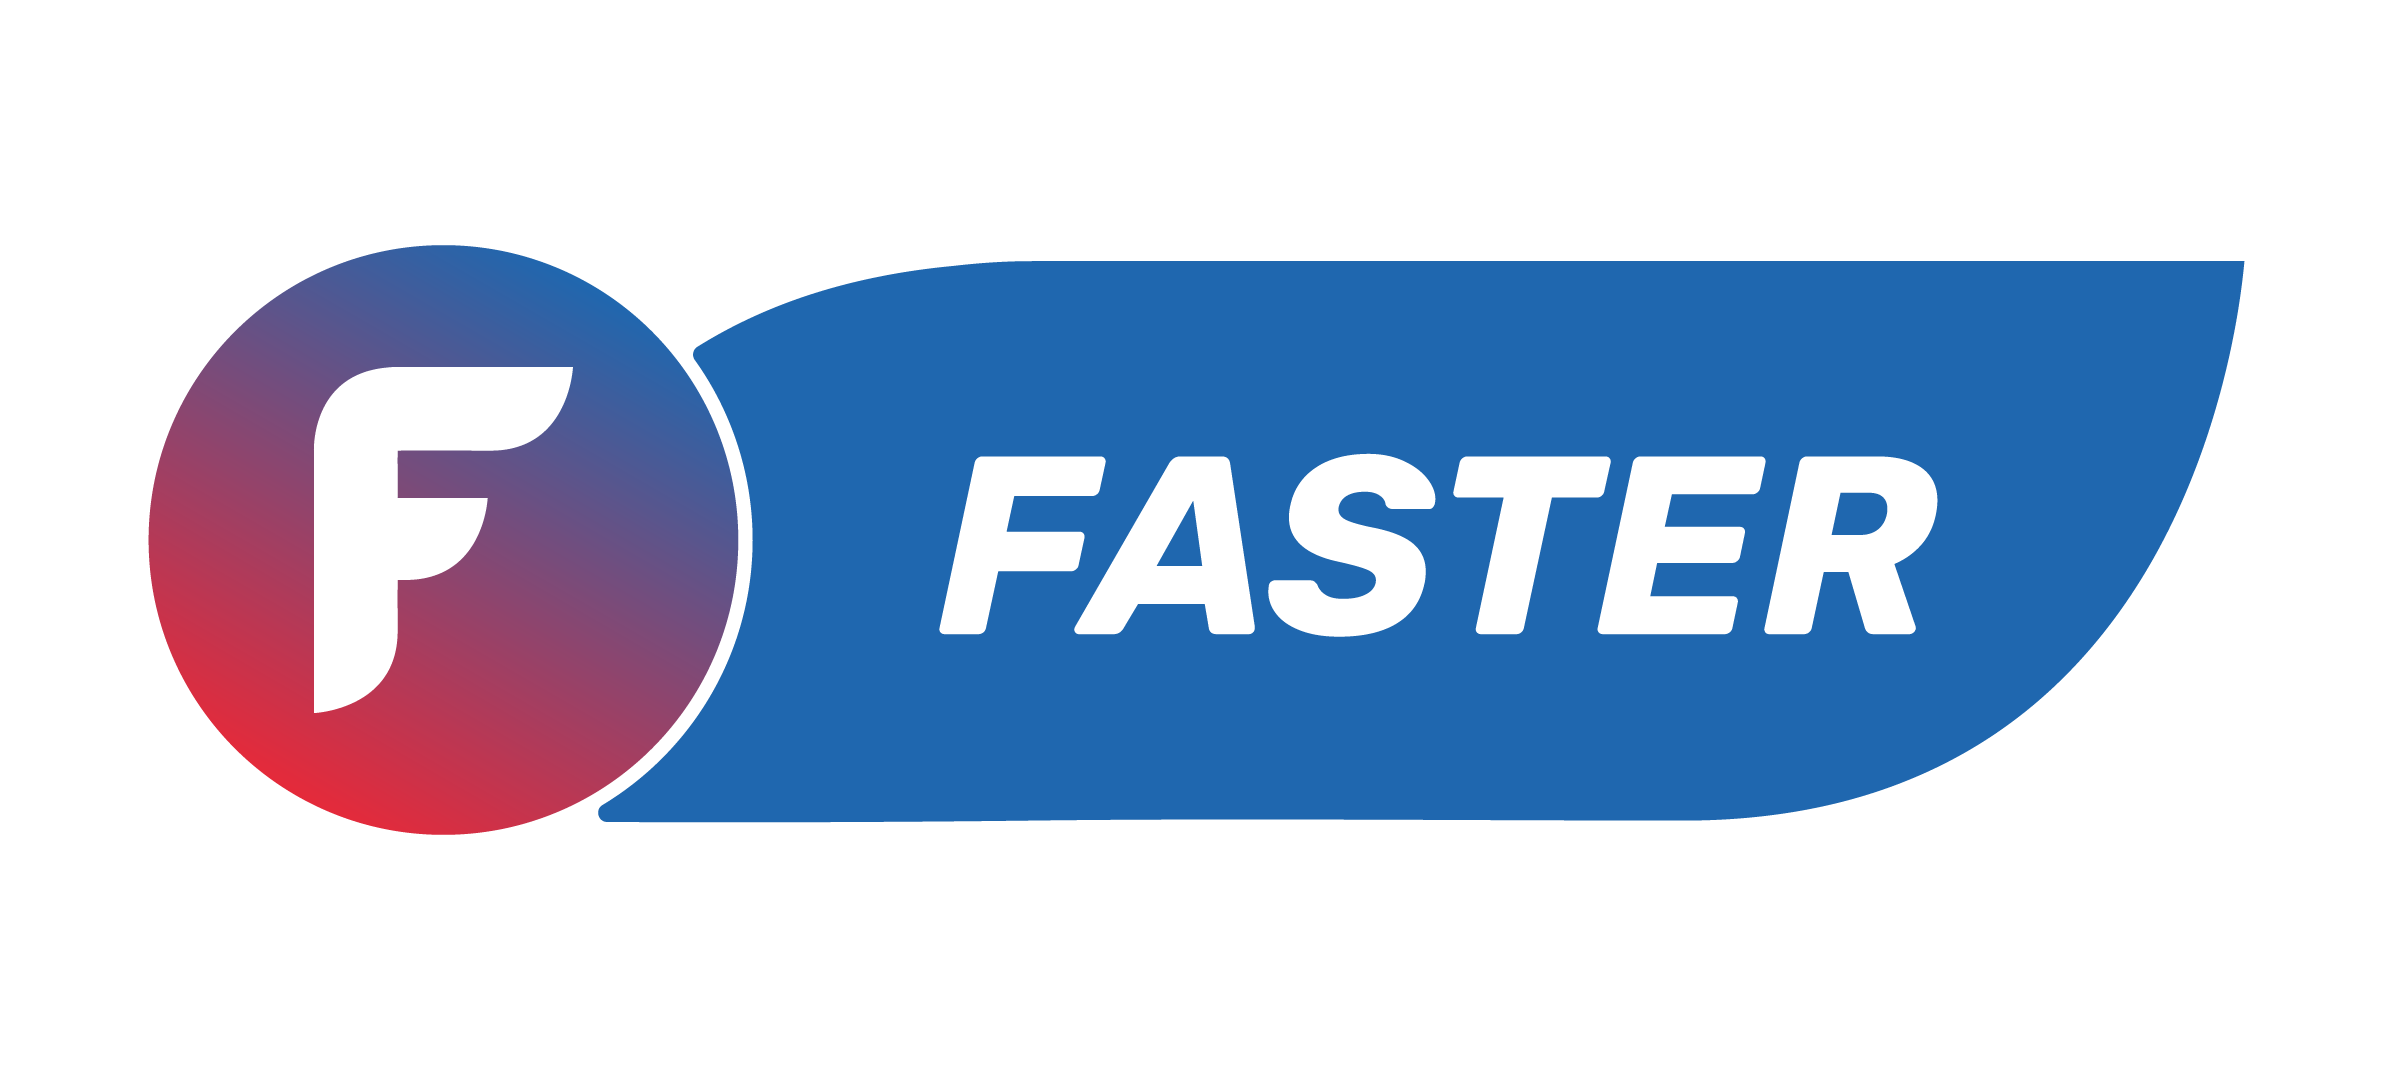 WHAT IS FASTER AND ITS MISSION